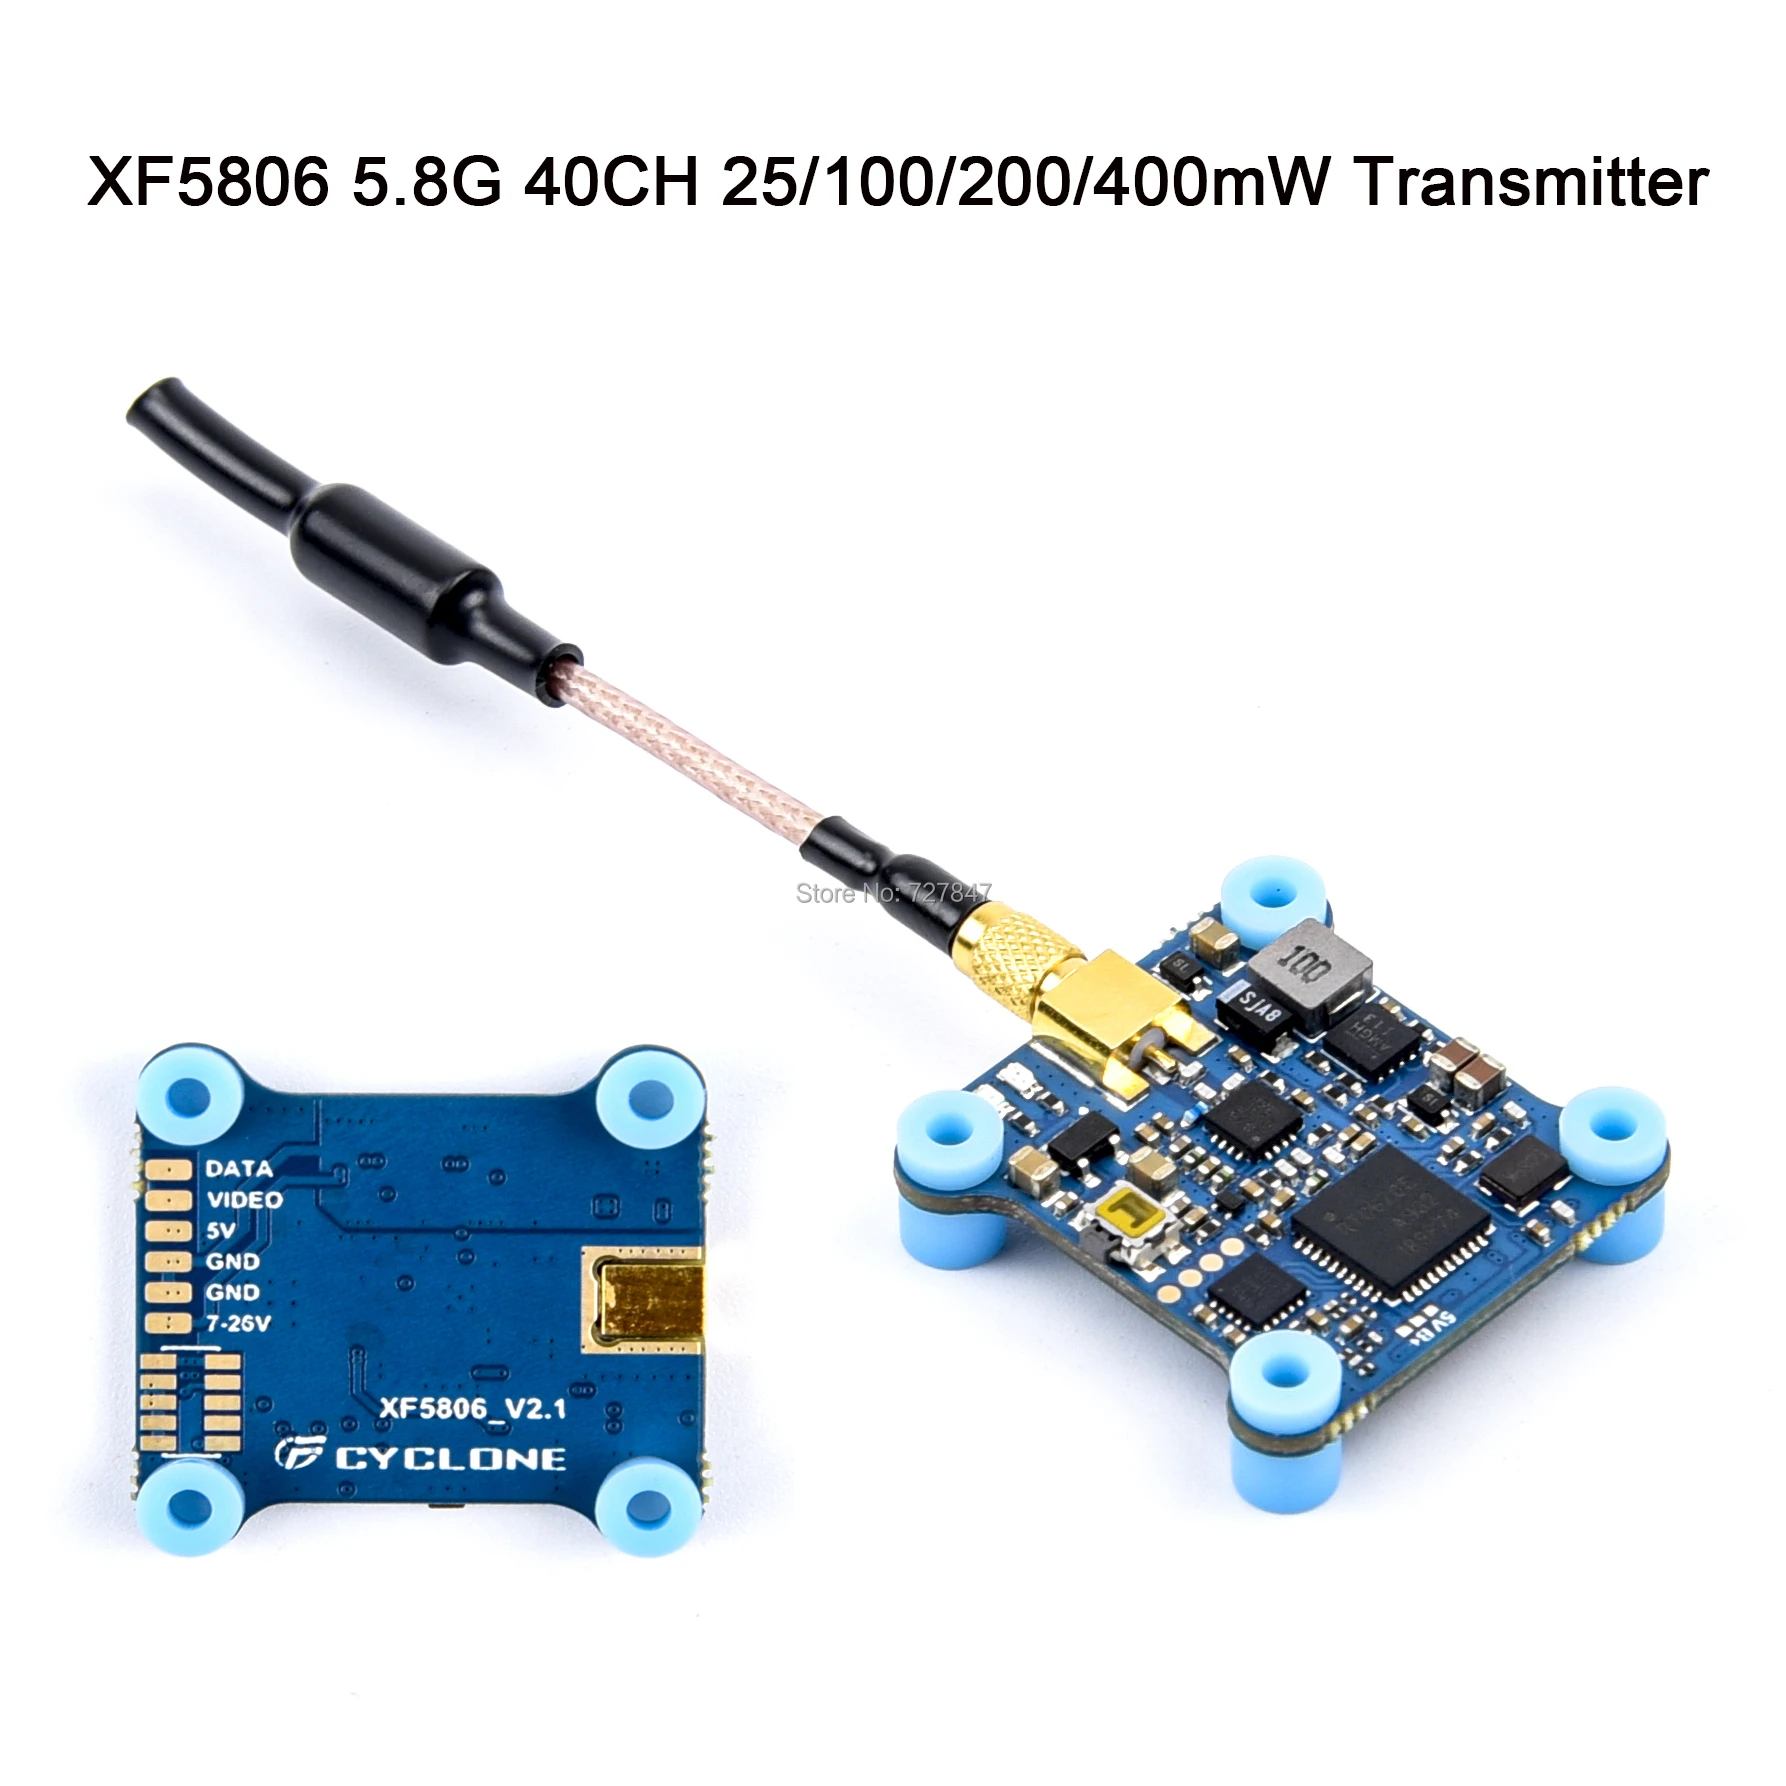 VTX XF5806 5.8G 40CH 25/100/200/400mW Switchable Video FPV Transmitter 20*20mm for XF Model FPV Racing RC Drone Multirotor Parts